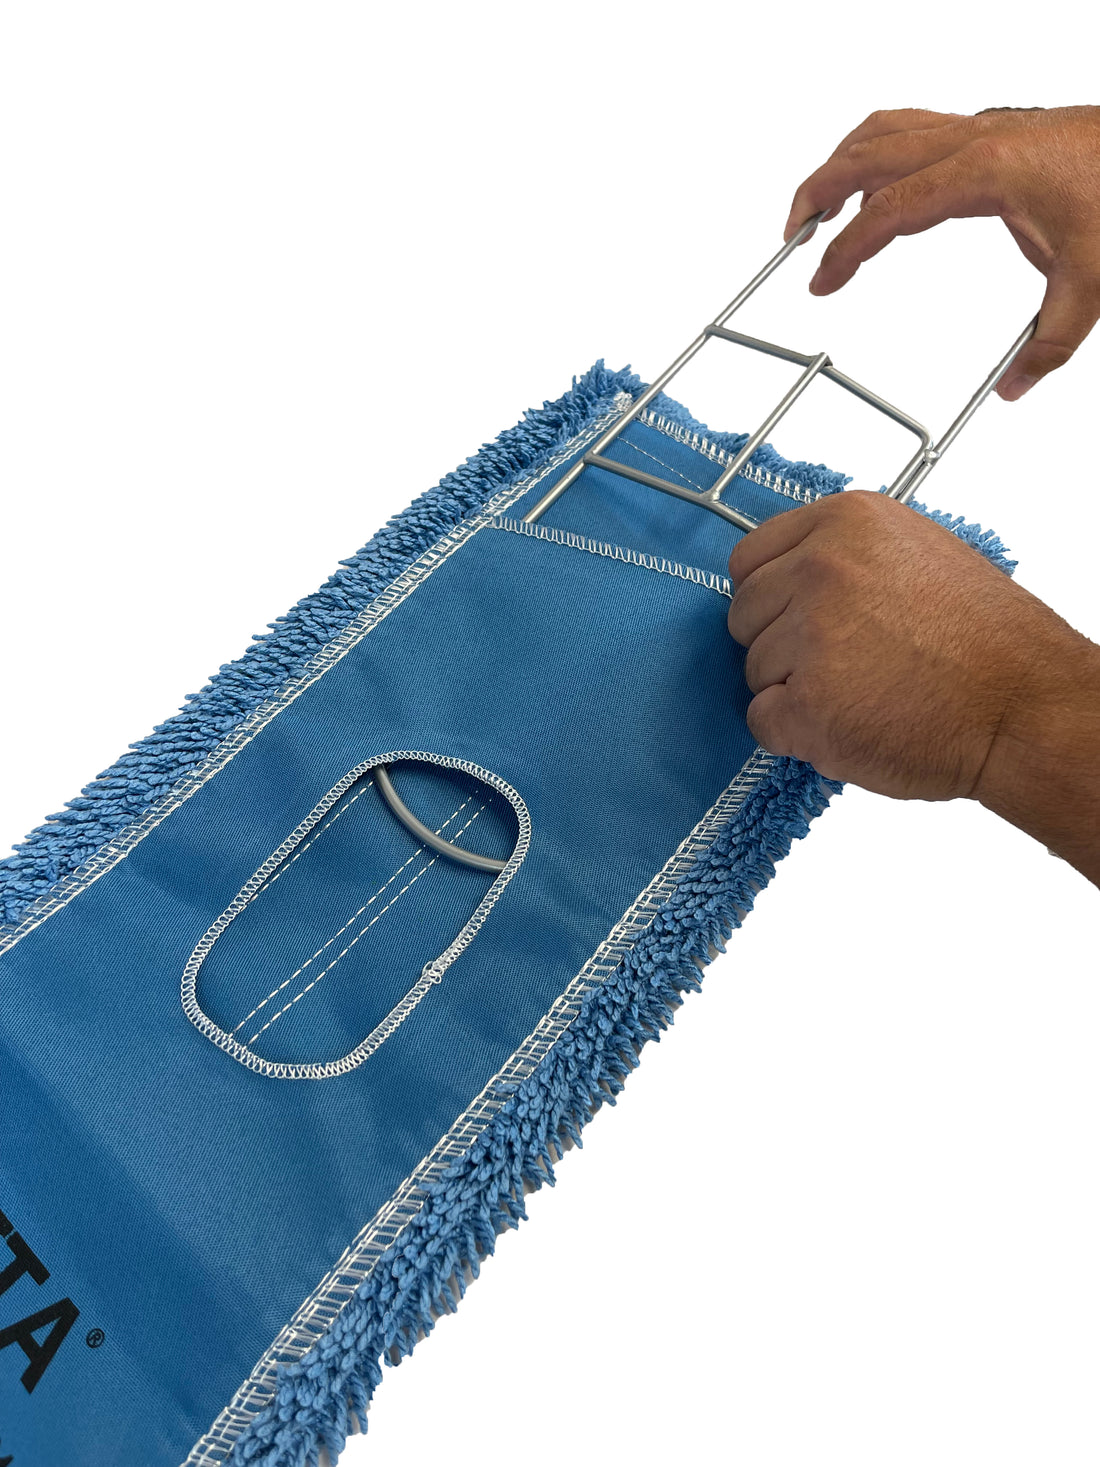 How to attach a Microfiber Closed-Loop Dust Mop to handle & frame